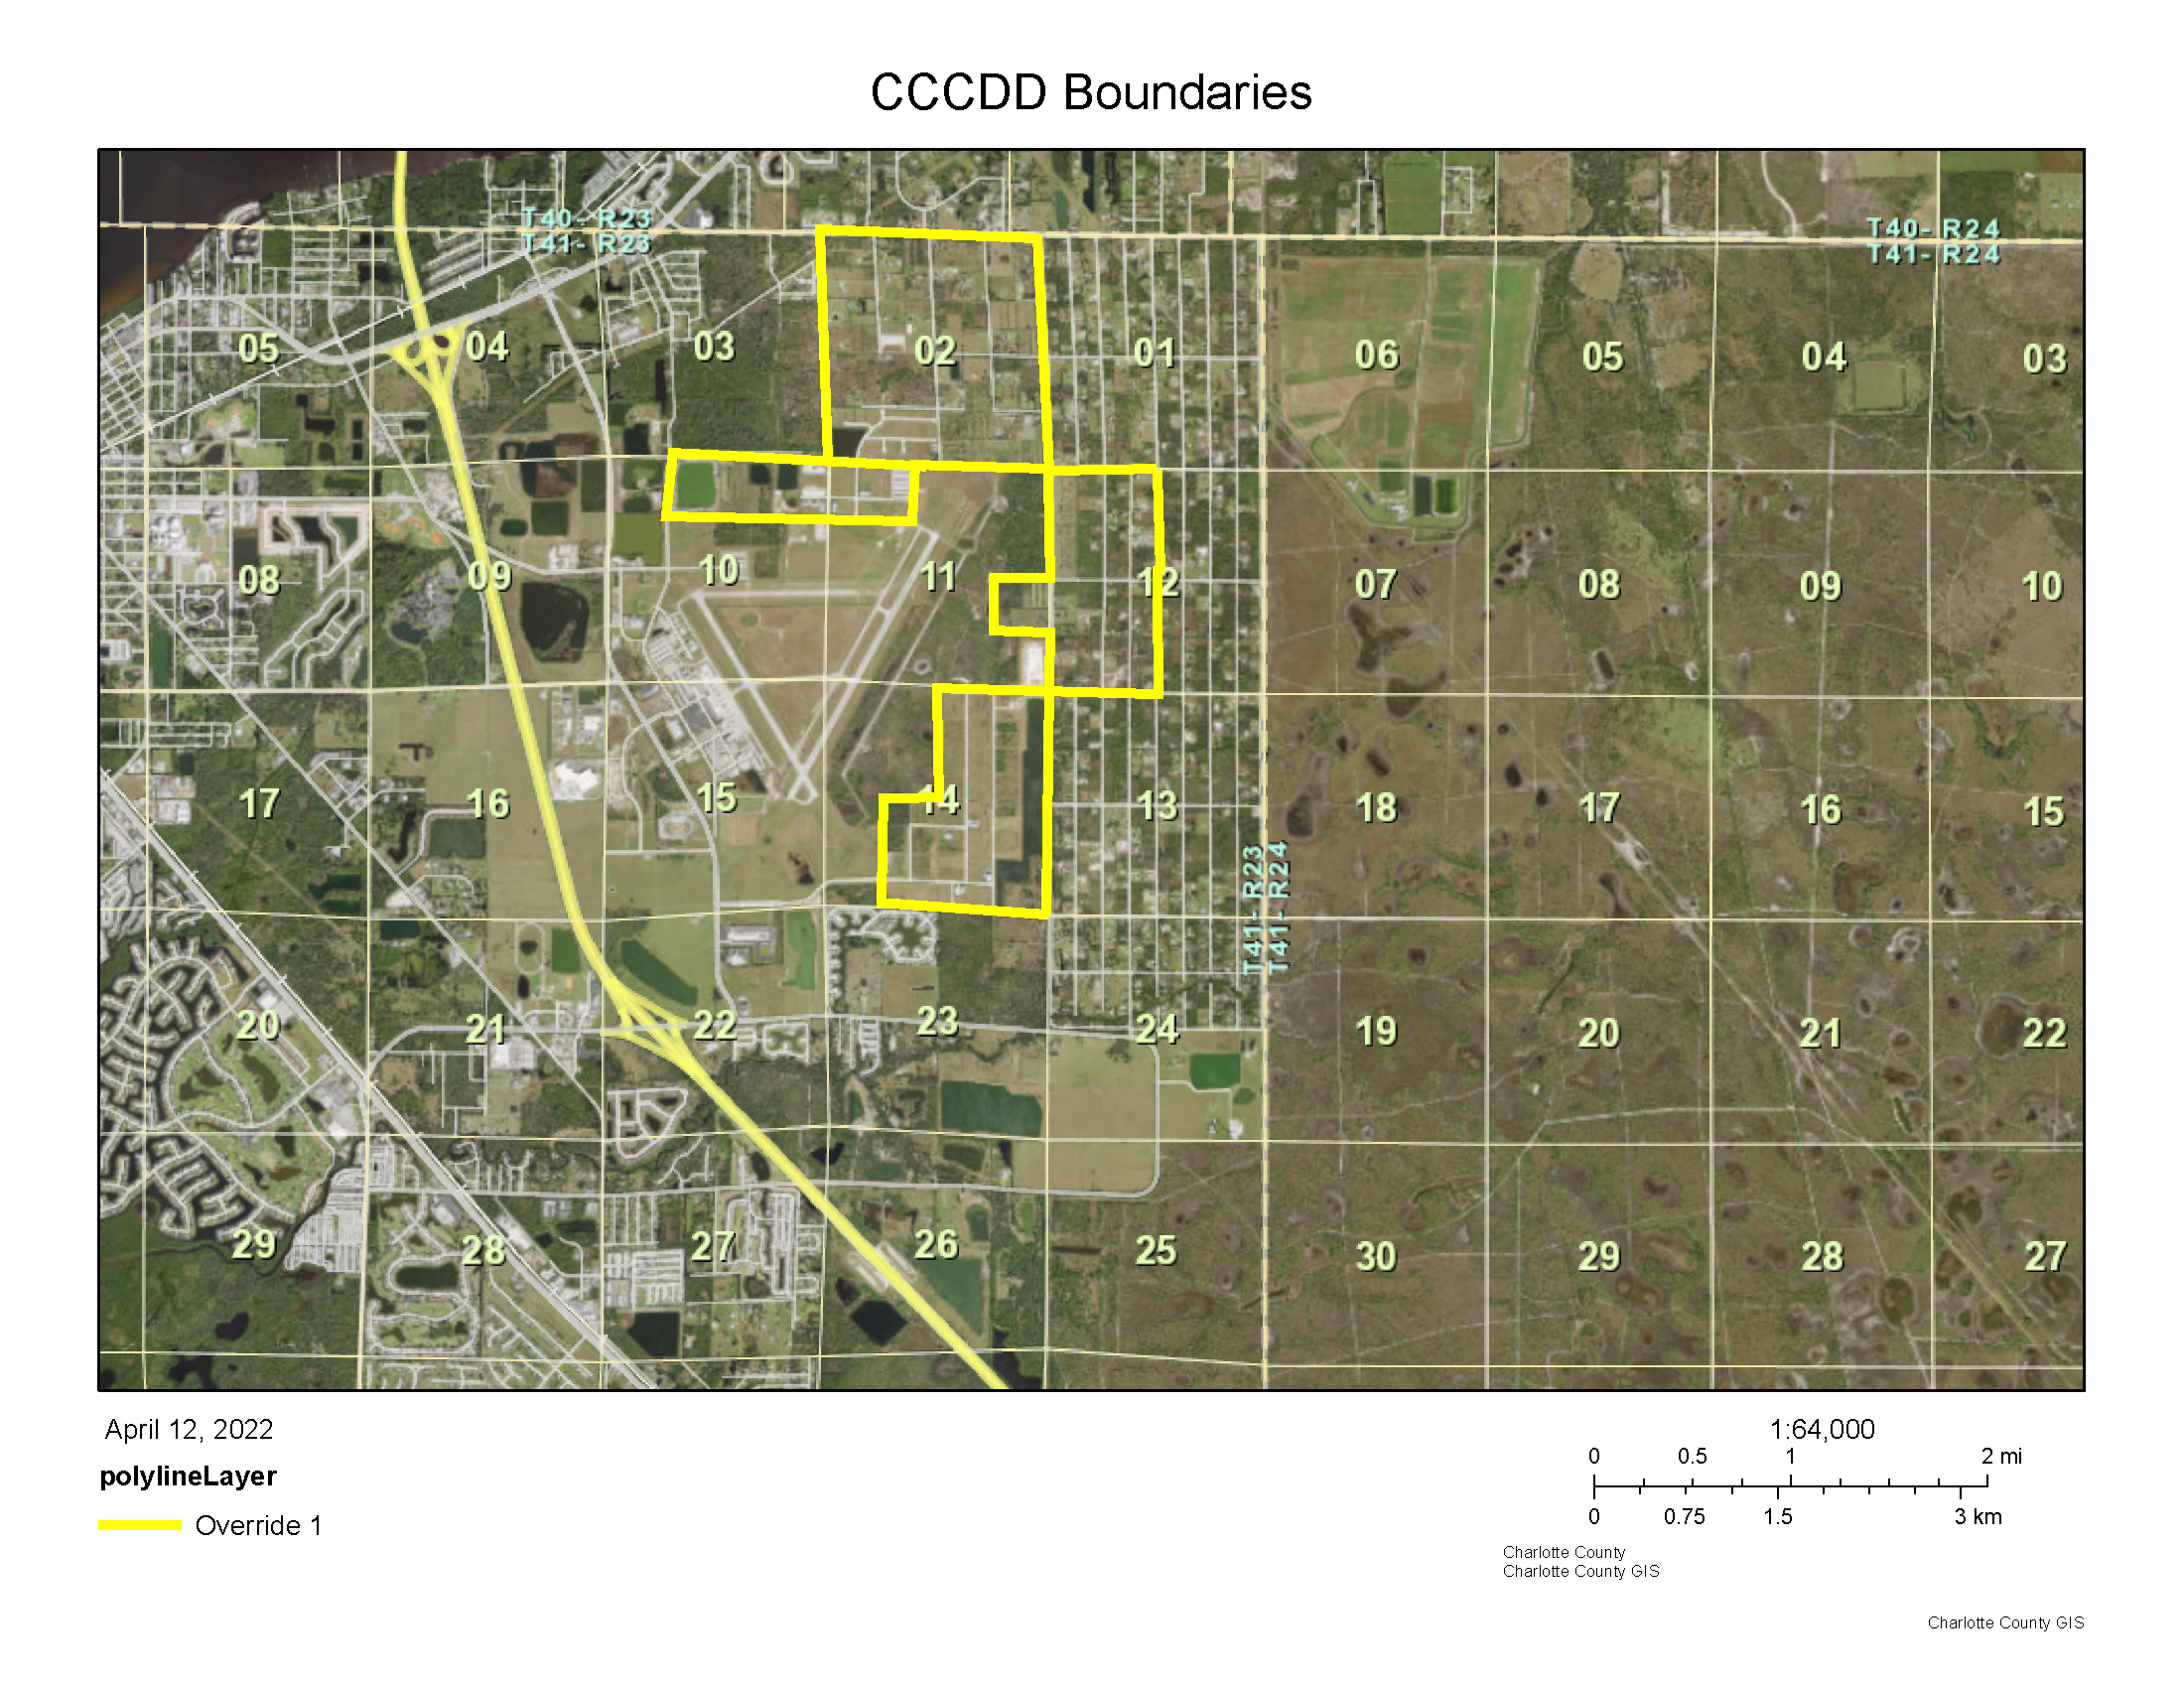 CCCDD Speical District Boundary Lines